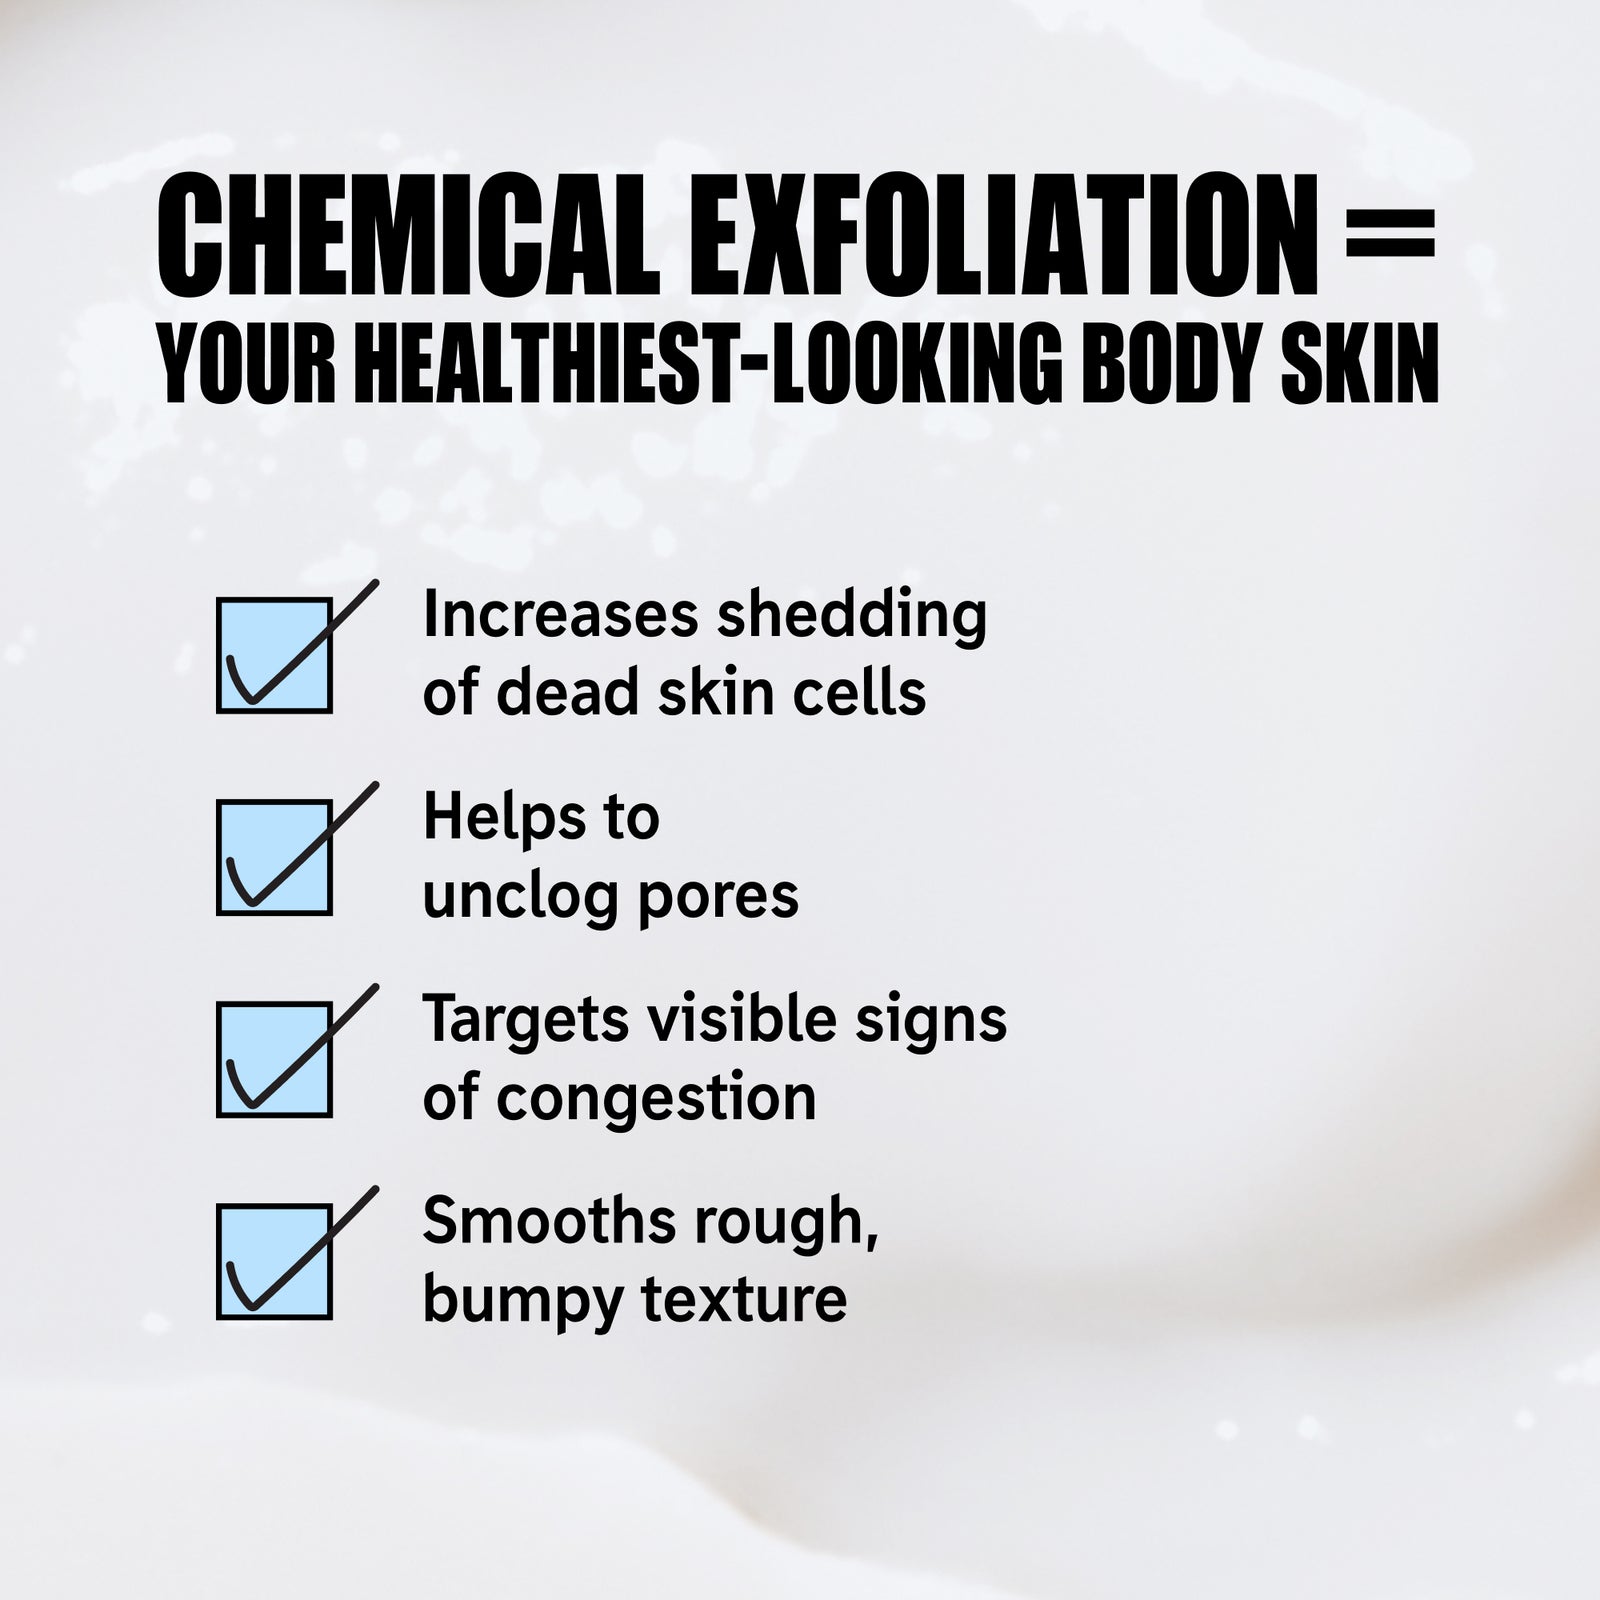 Benefits of chemical exfoliation,  increase shedding of dead skin cells, unclog pores, target visable signs of congestion & smooth rough bumpy skin